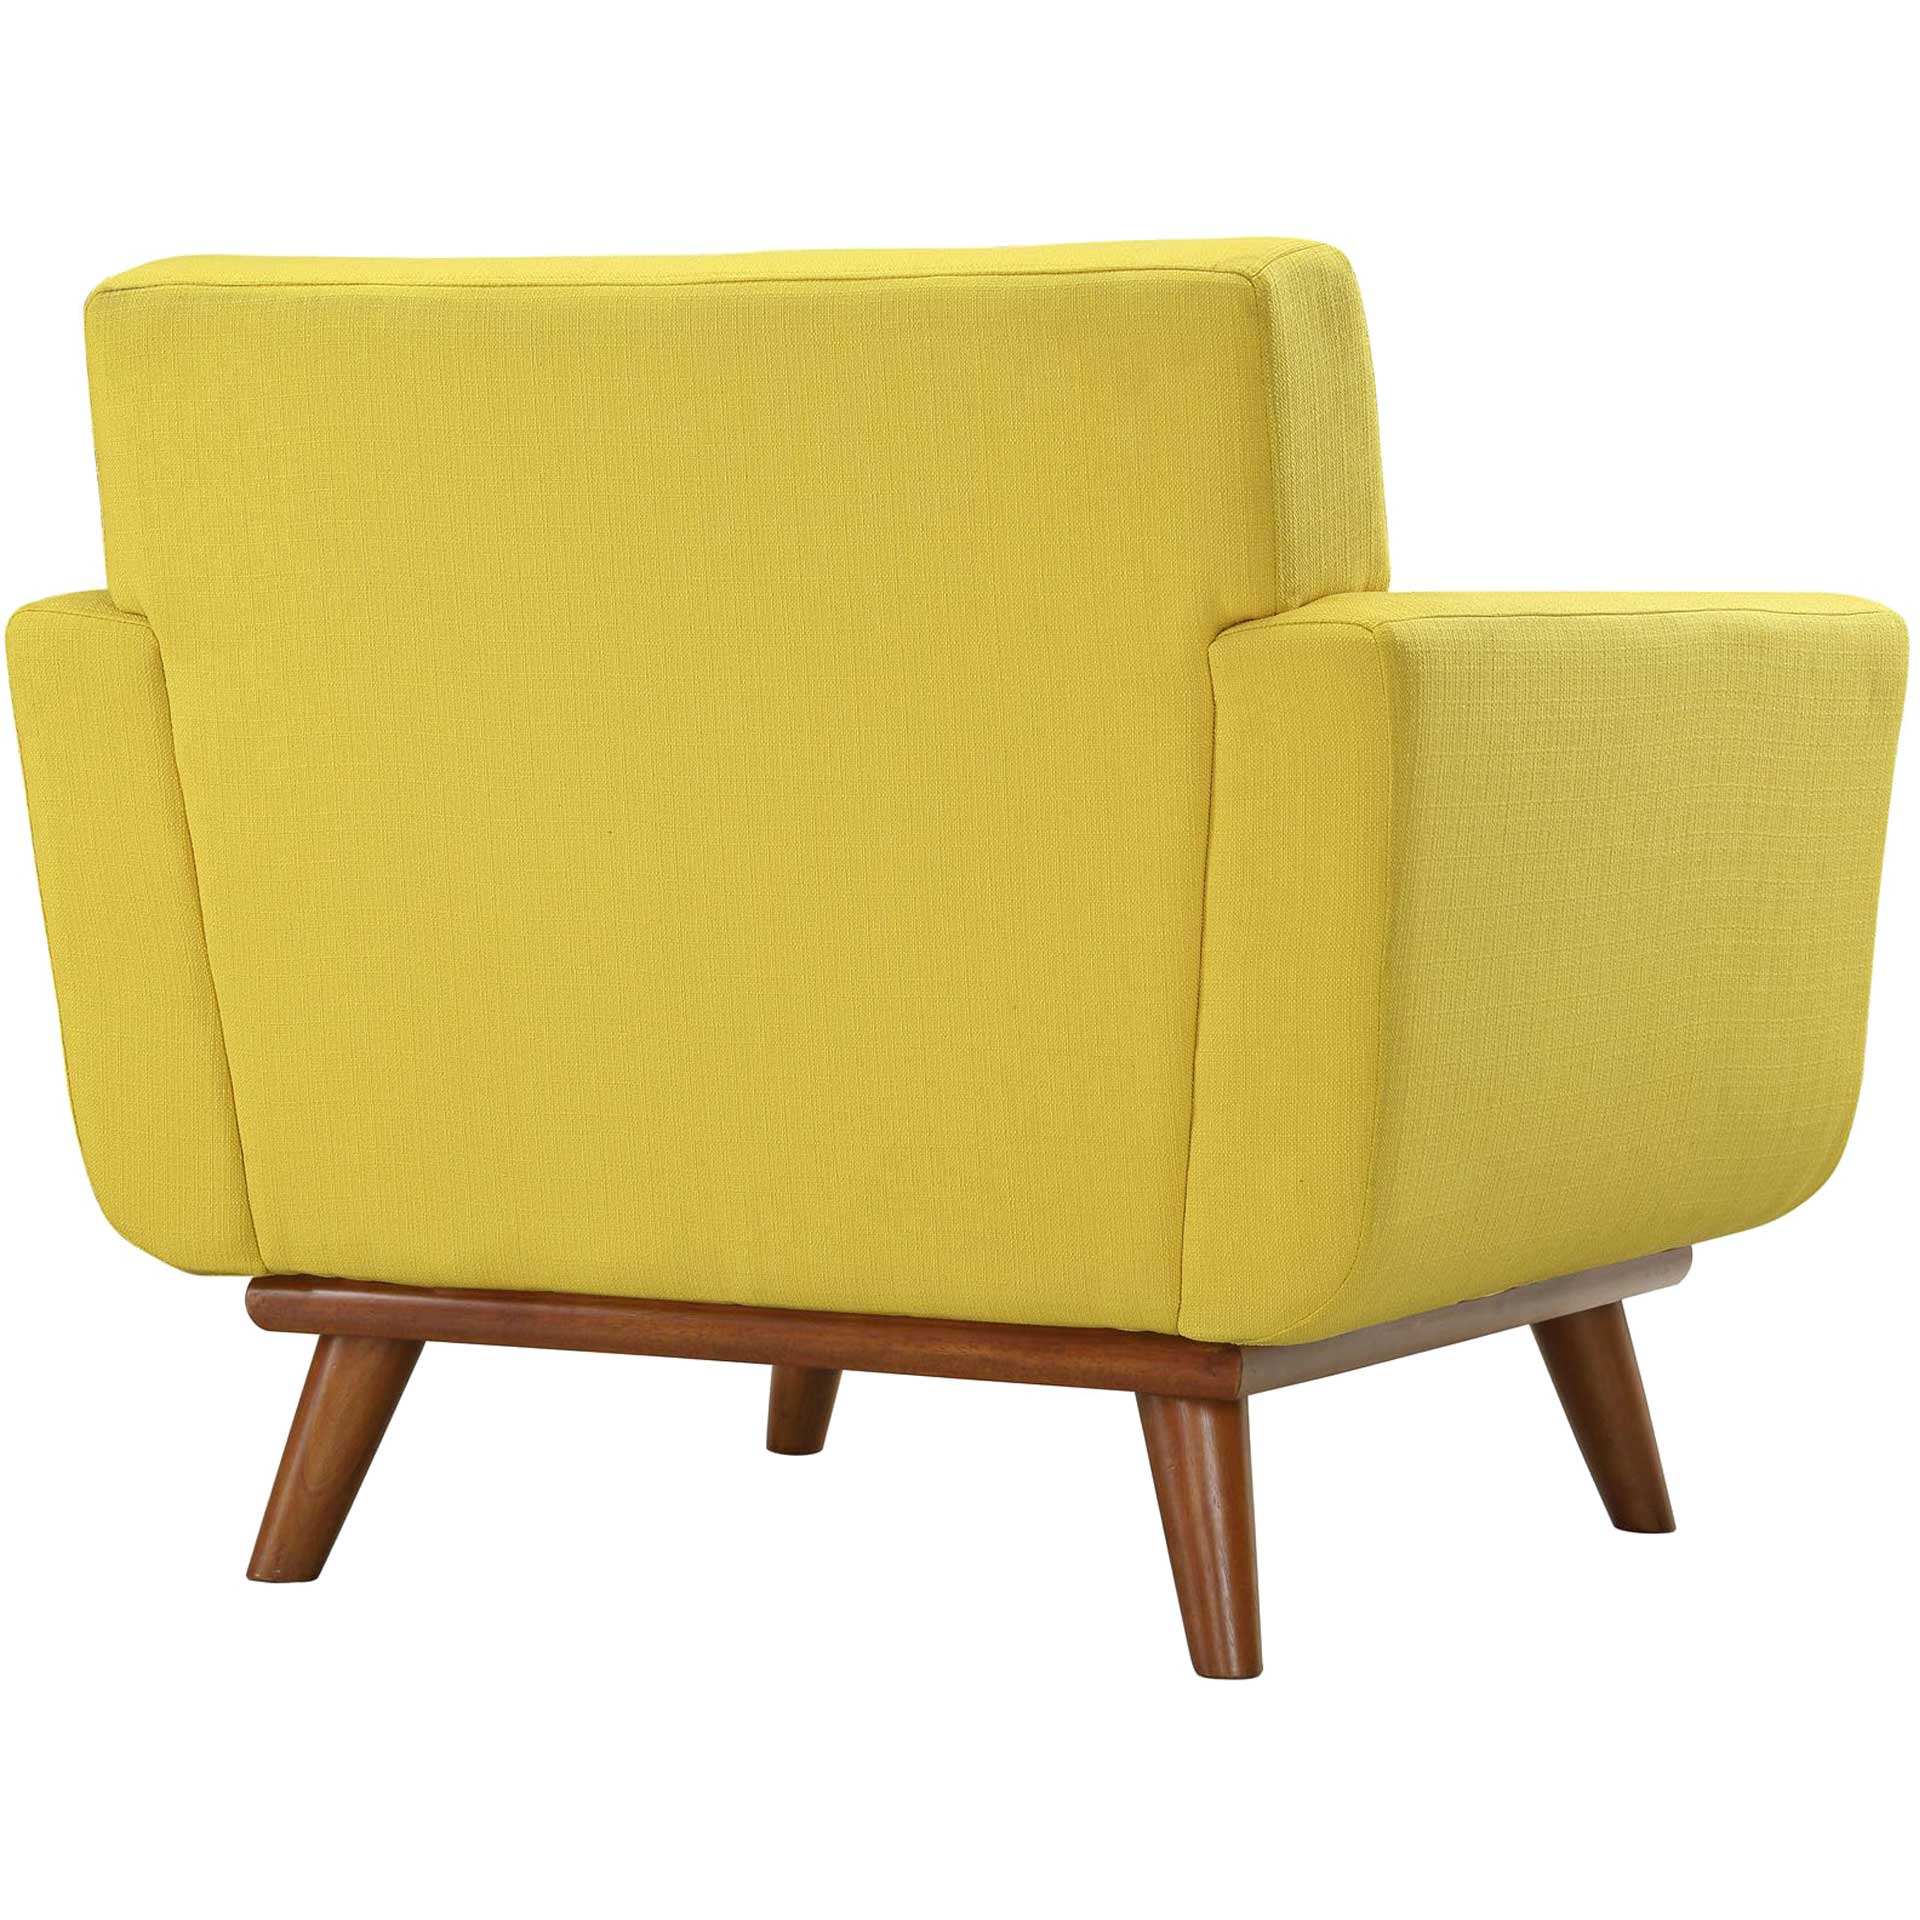 Emory Upholstered Armchair Sunny